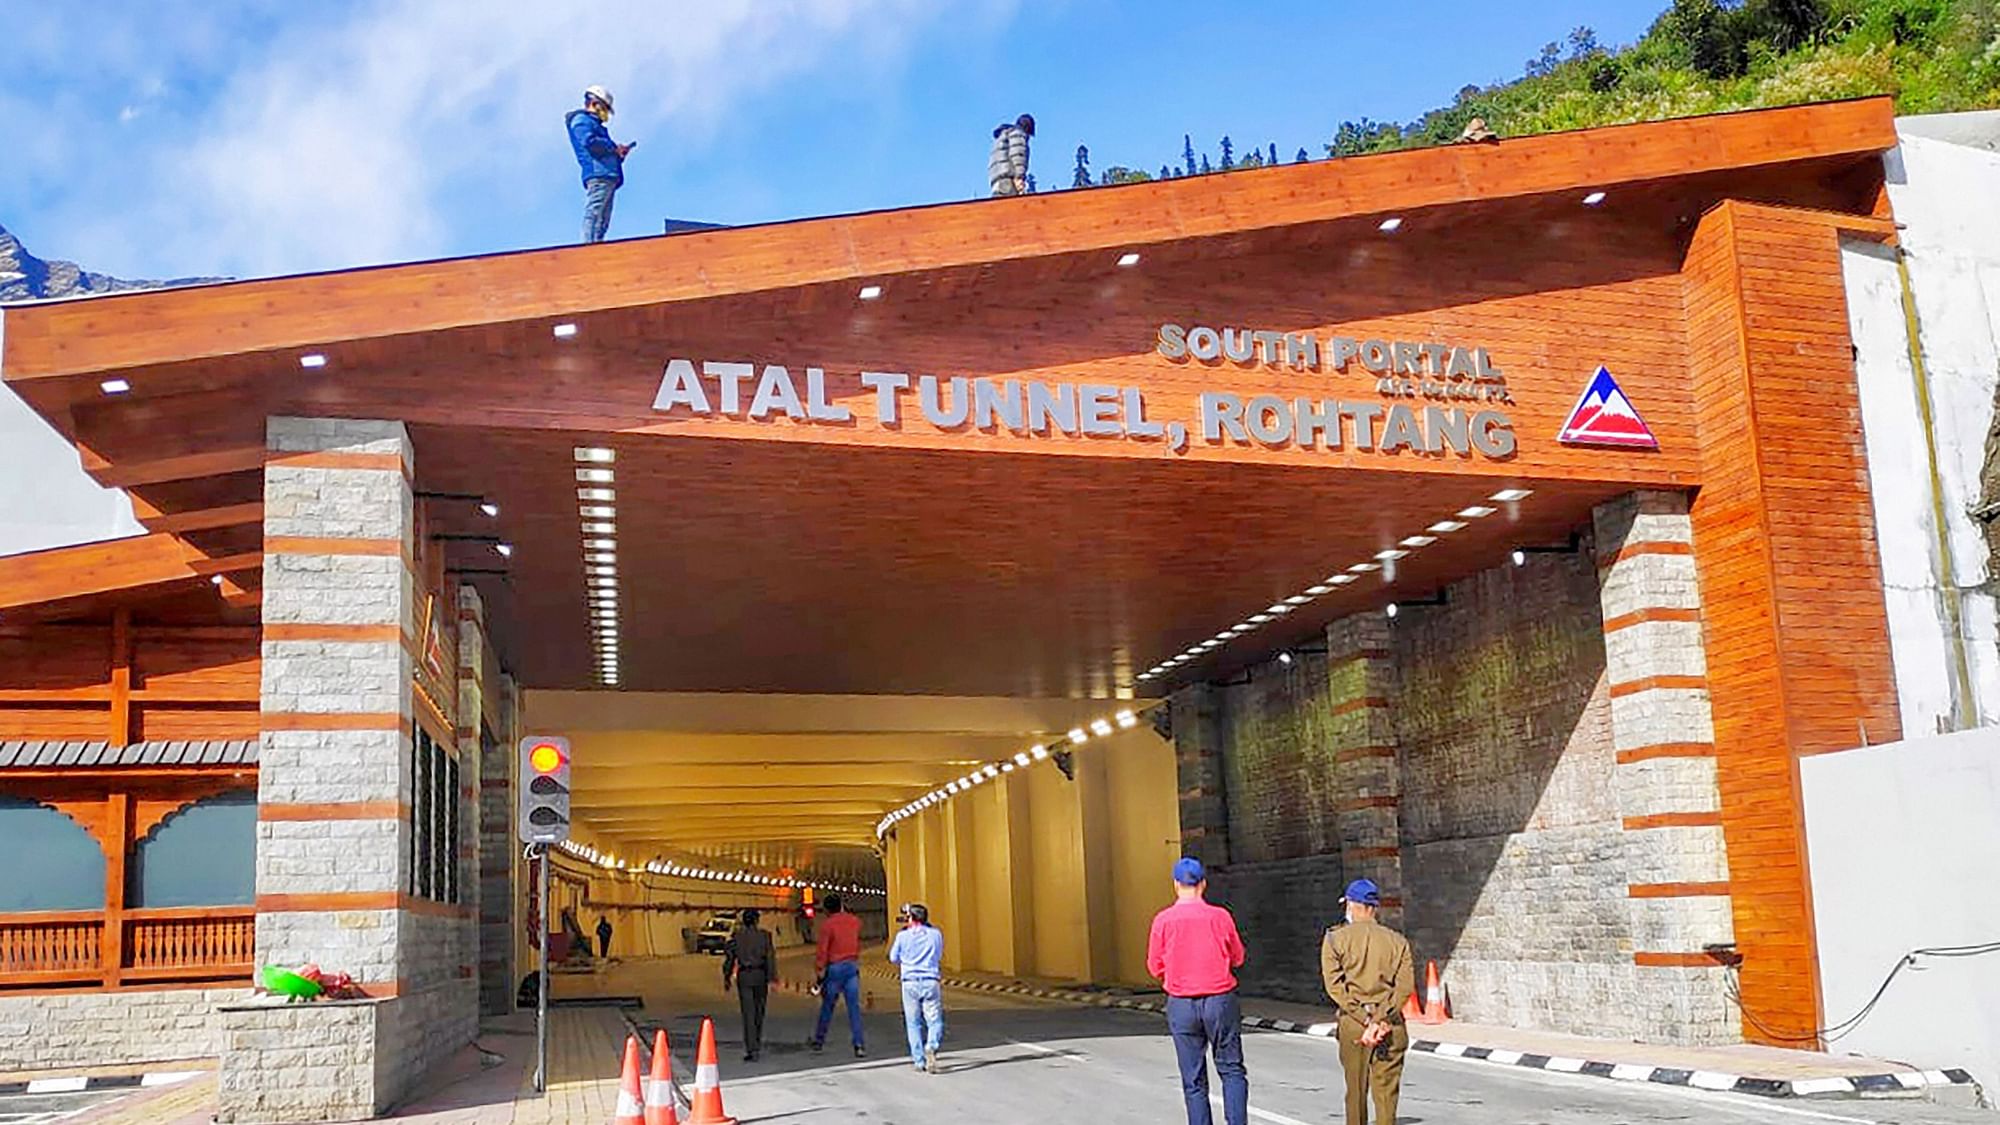 Prime Minister Modi inaugurated the Atal Tunnel on Saturday, 3 October.